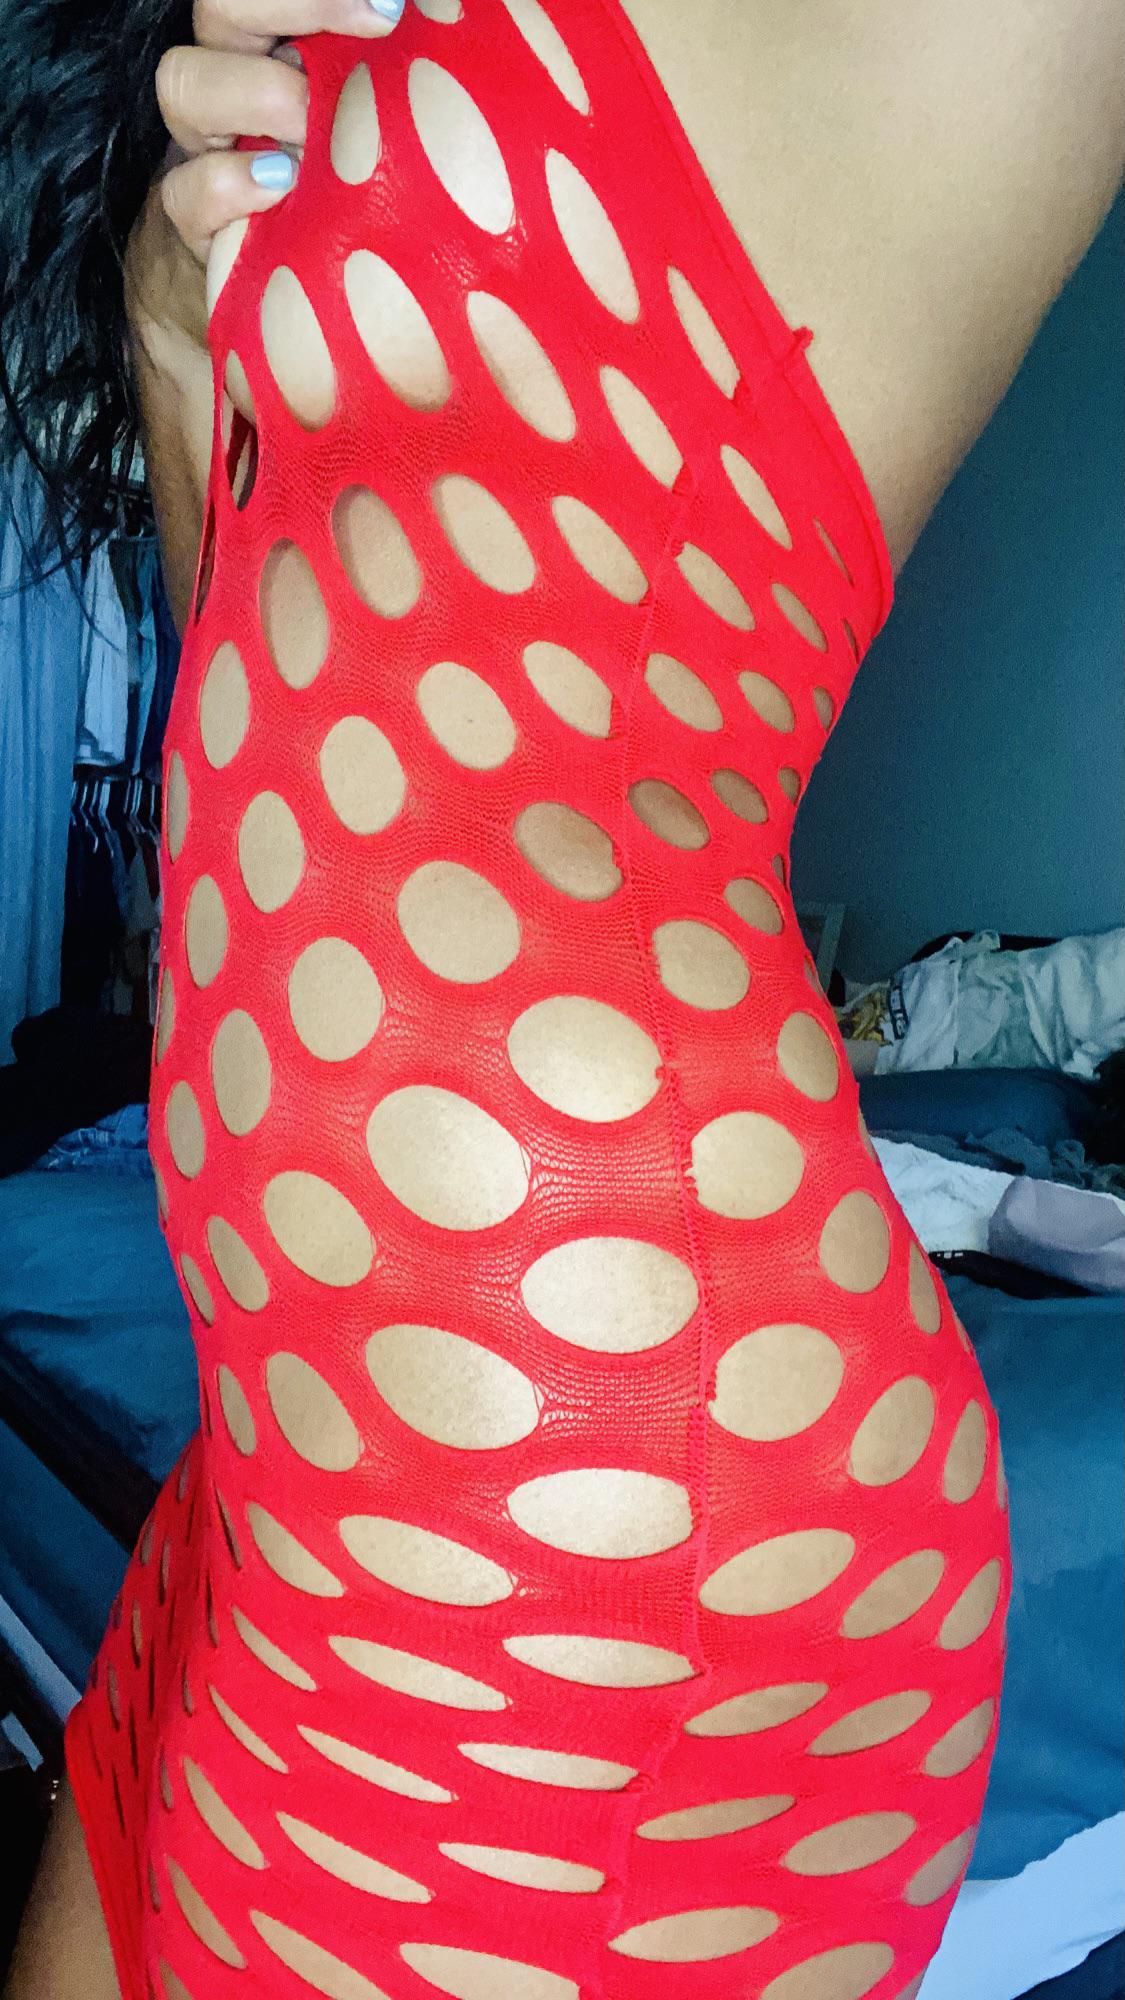 Would You Fuck Me In This?